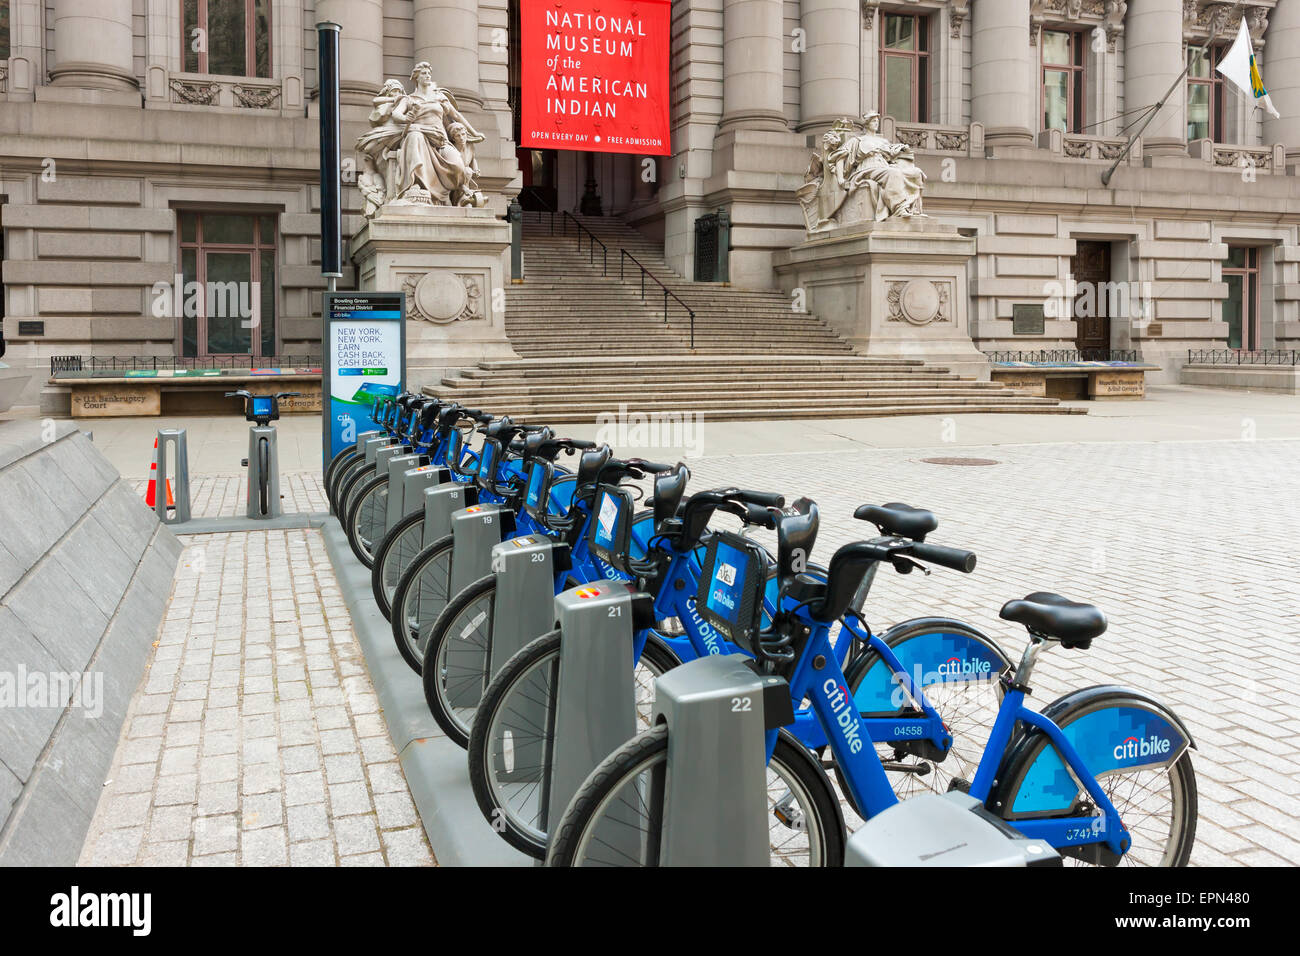 Citi Bike bicycles wait for riders at a docking station near the National Museum of the American Indian in New York City. Stock Photo